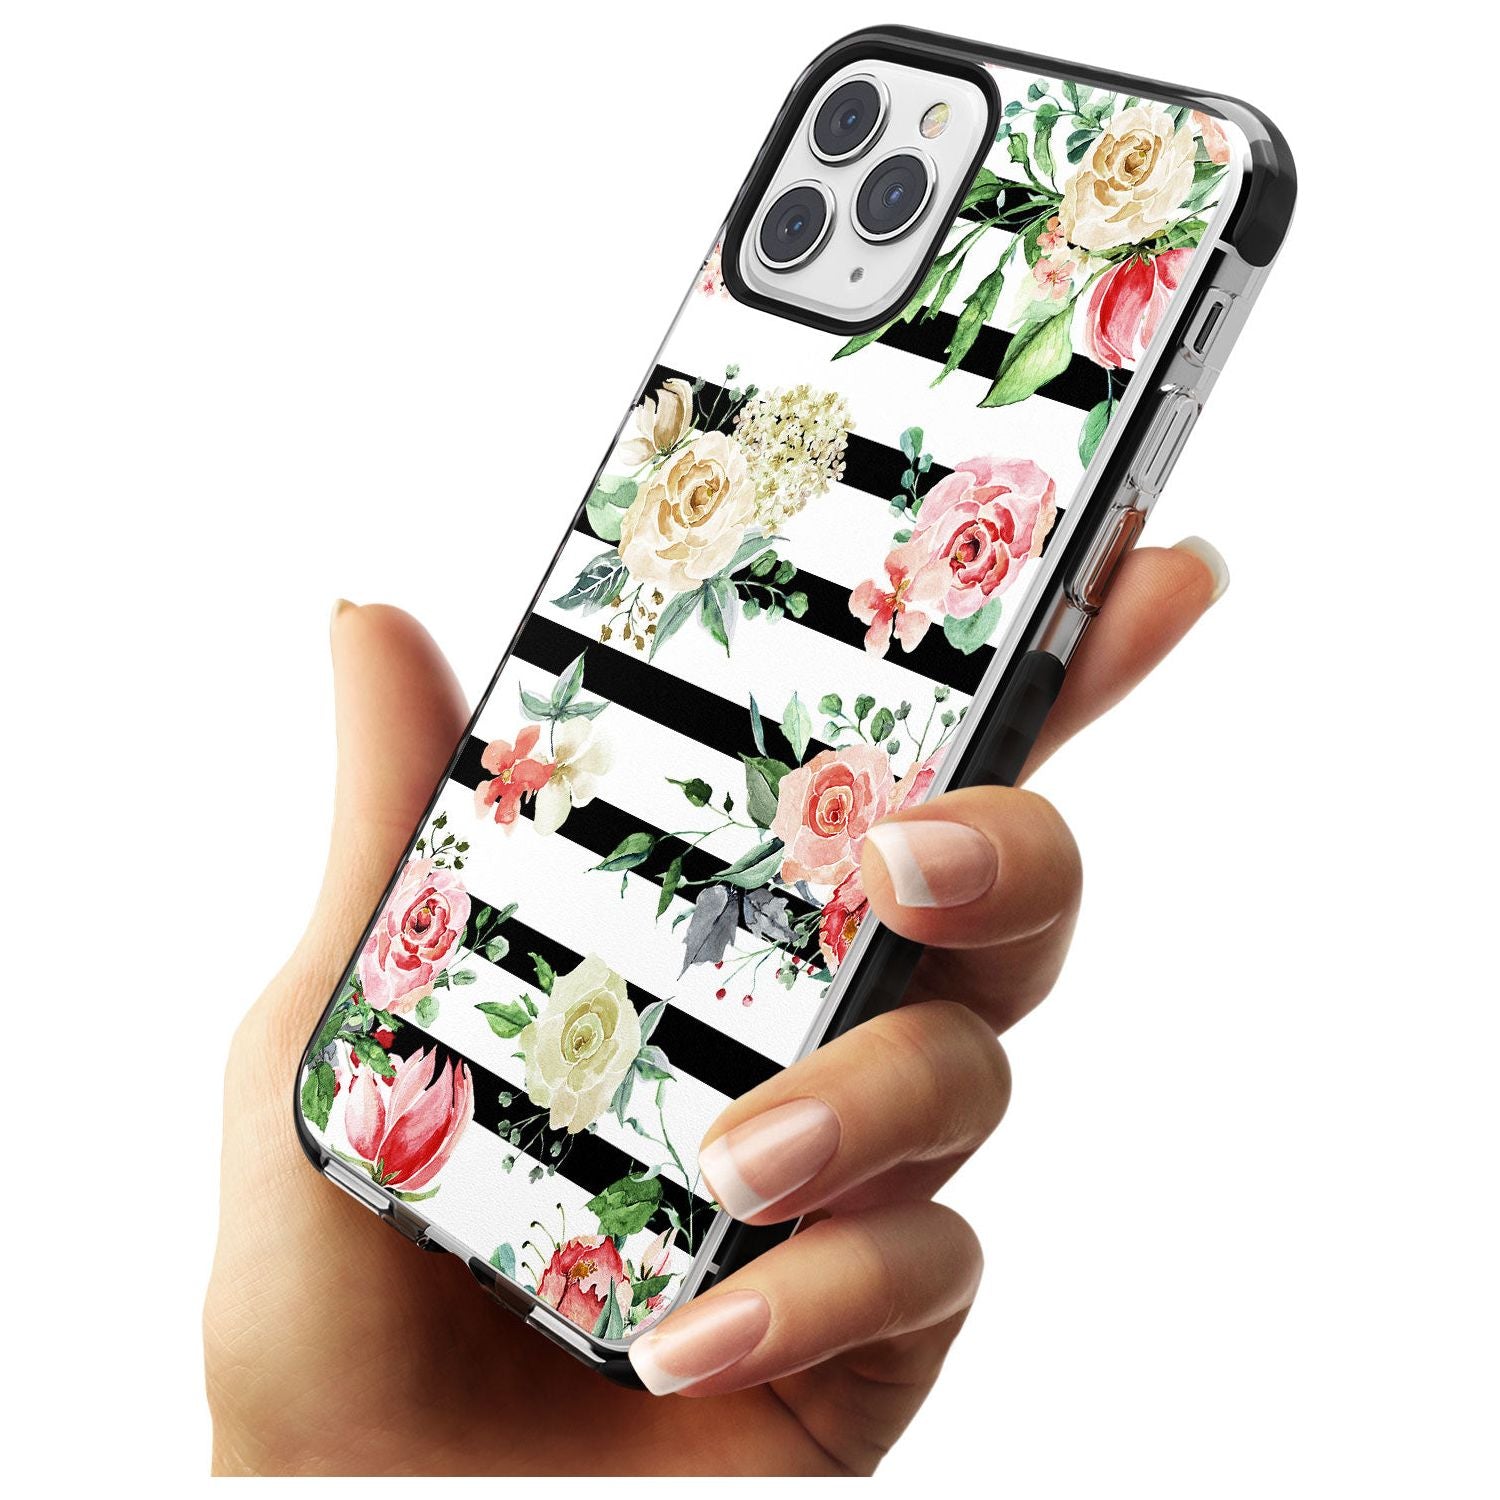 Bold Stripes & Flower Pattern Black Impact Phone Case for iPhone 11 Pro Max